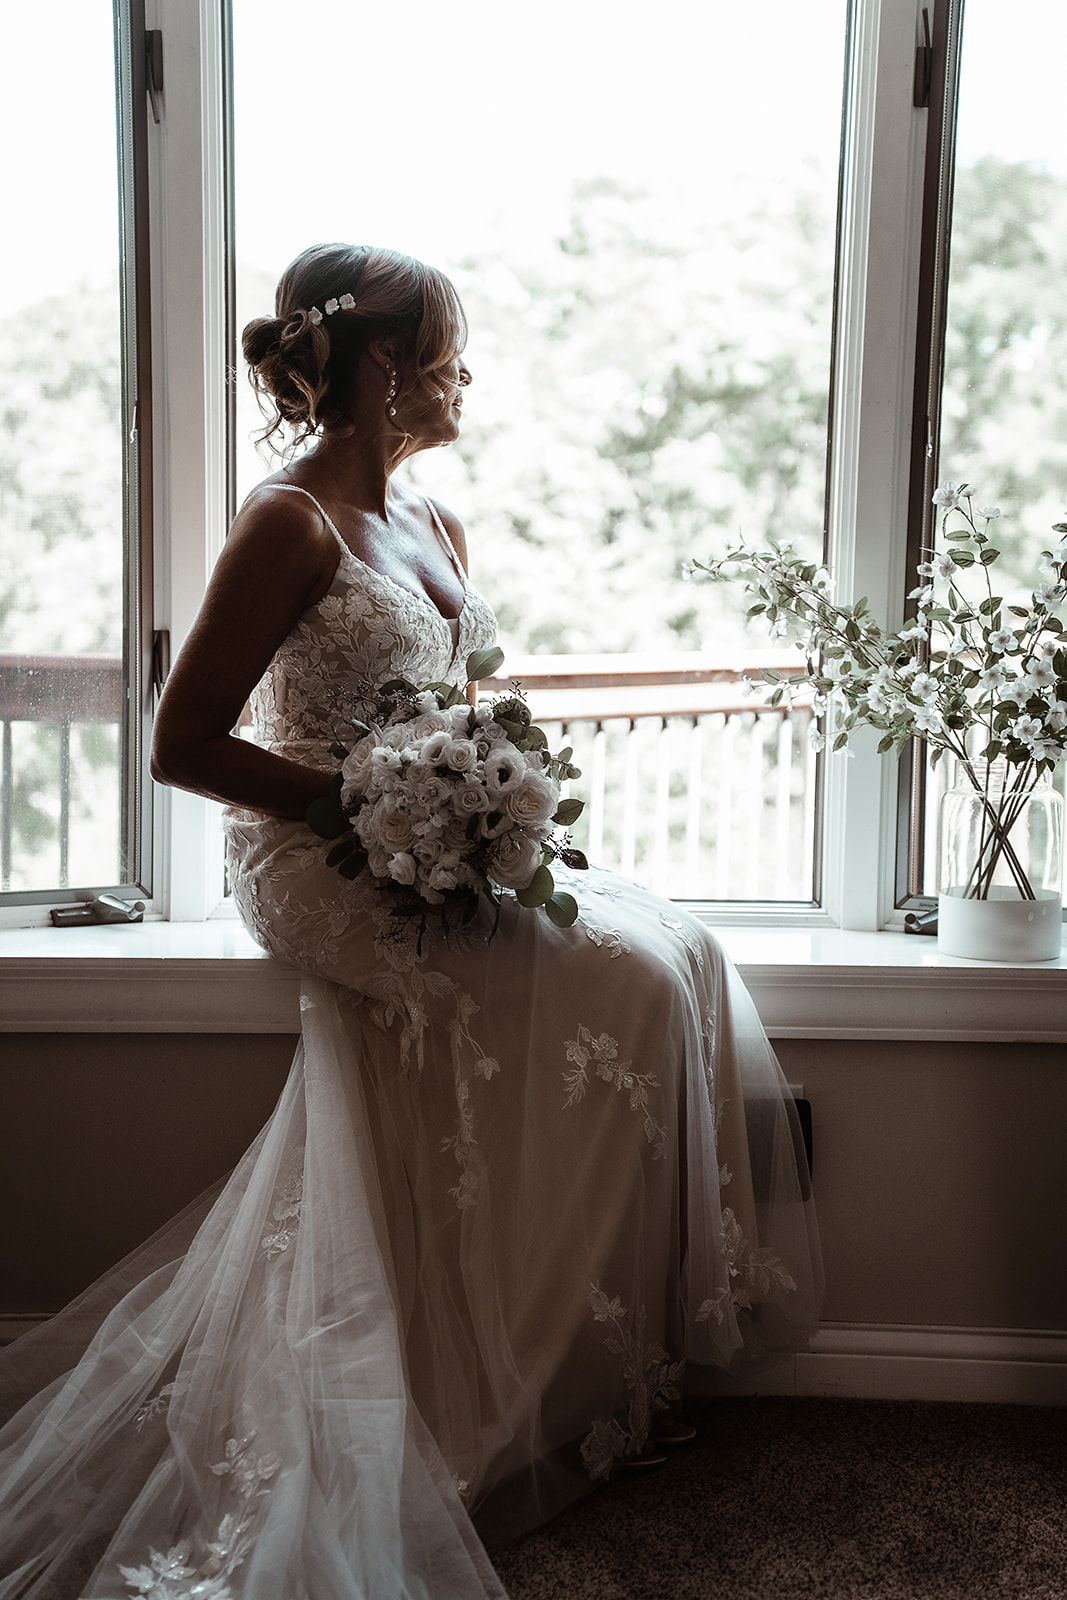 Artistic shot of bride looking out window